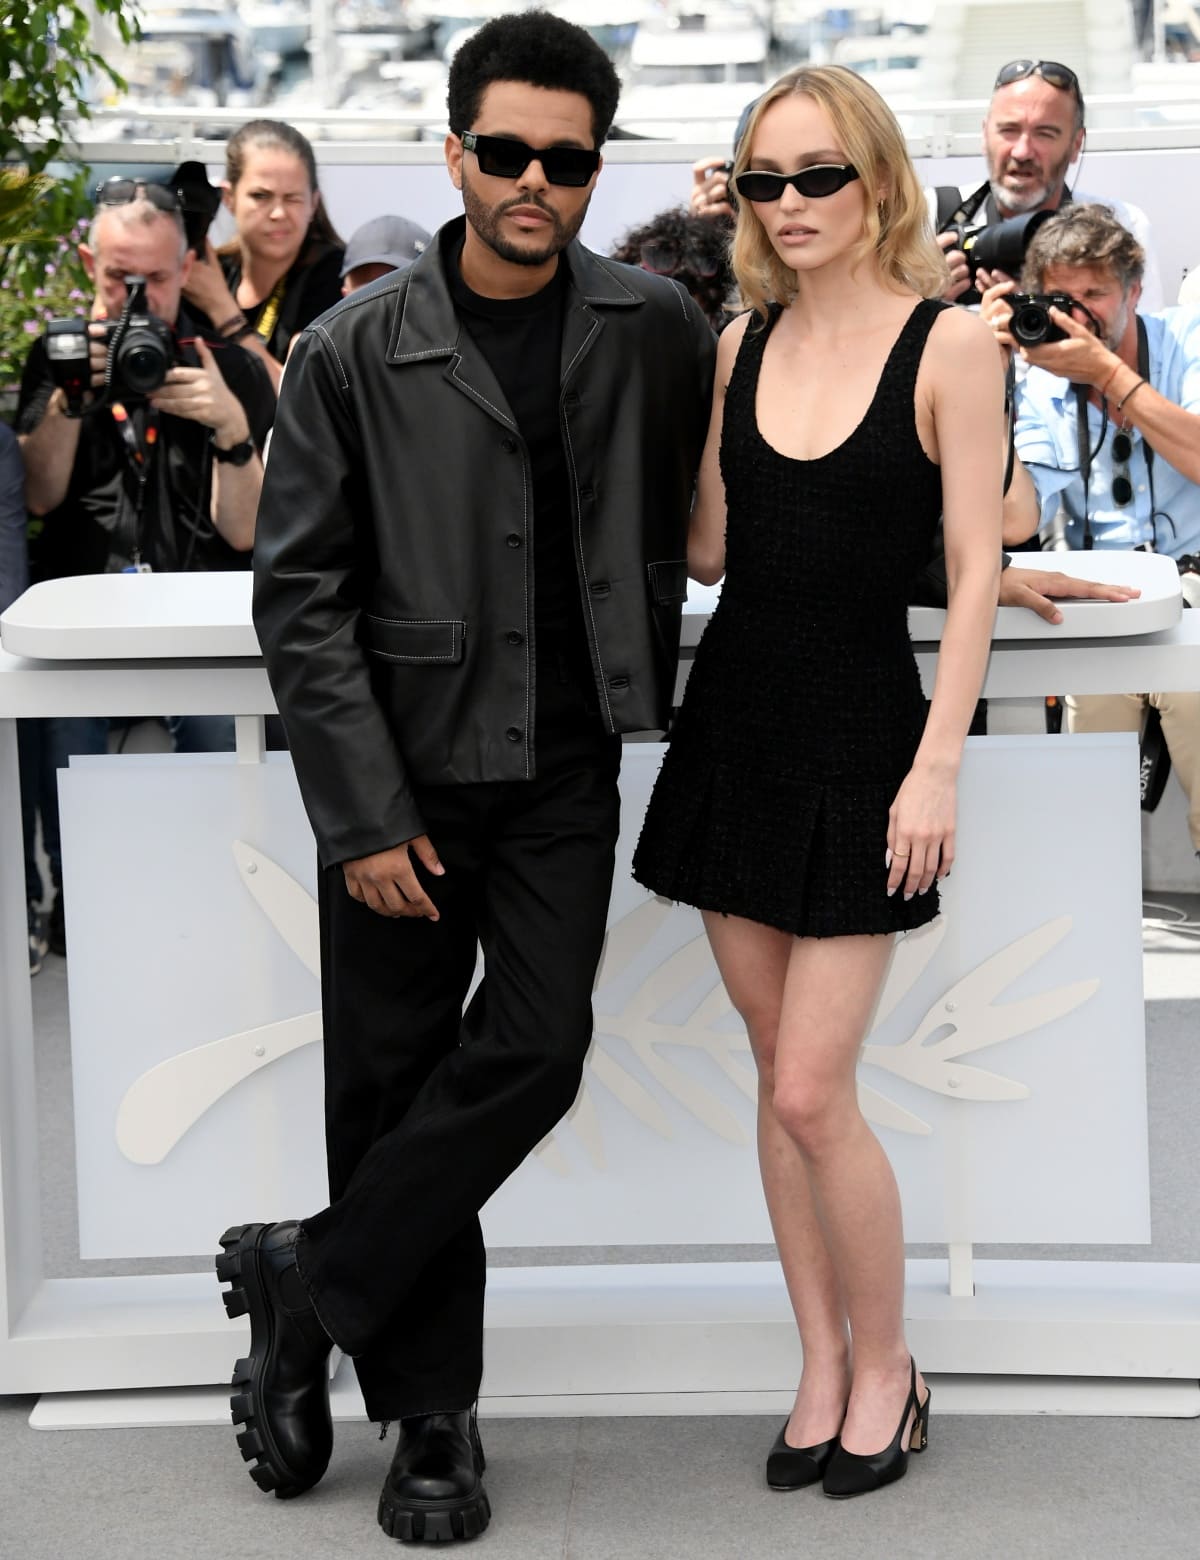 Abel Tesfaye and Lily-Rose Depp in their cool and chic all-black ensembles at the photocall for The Idol during the 76th Cannes Film Festival